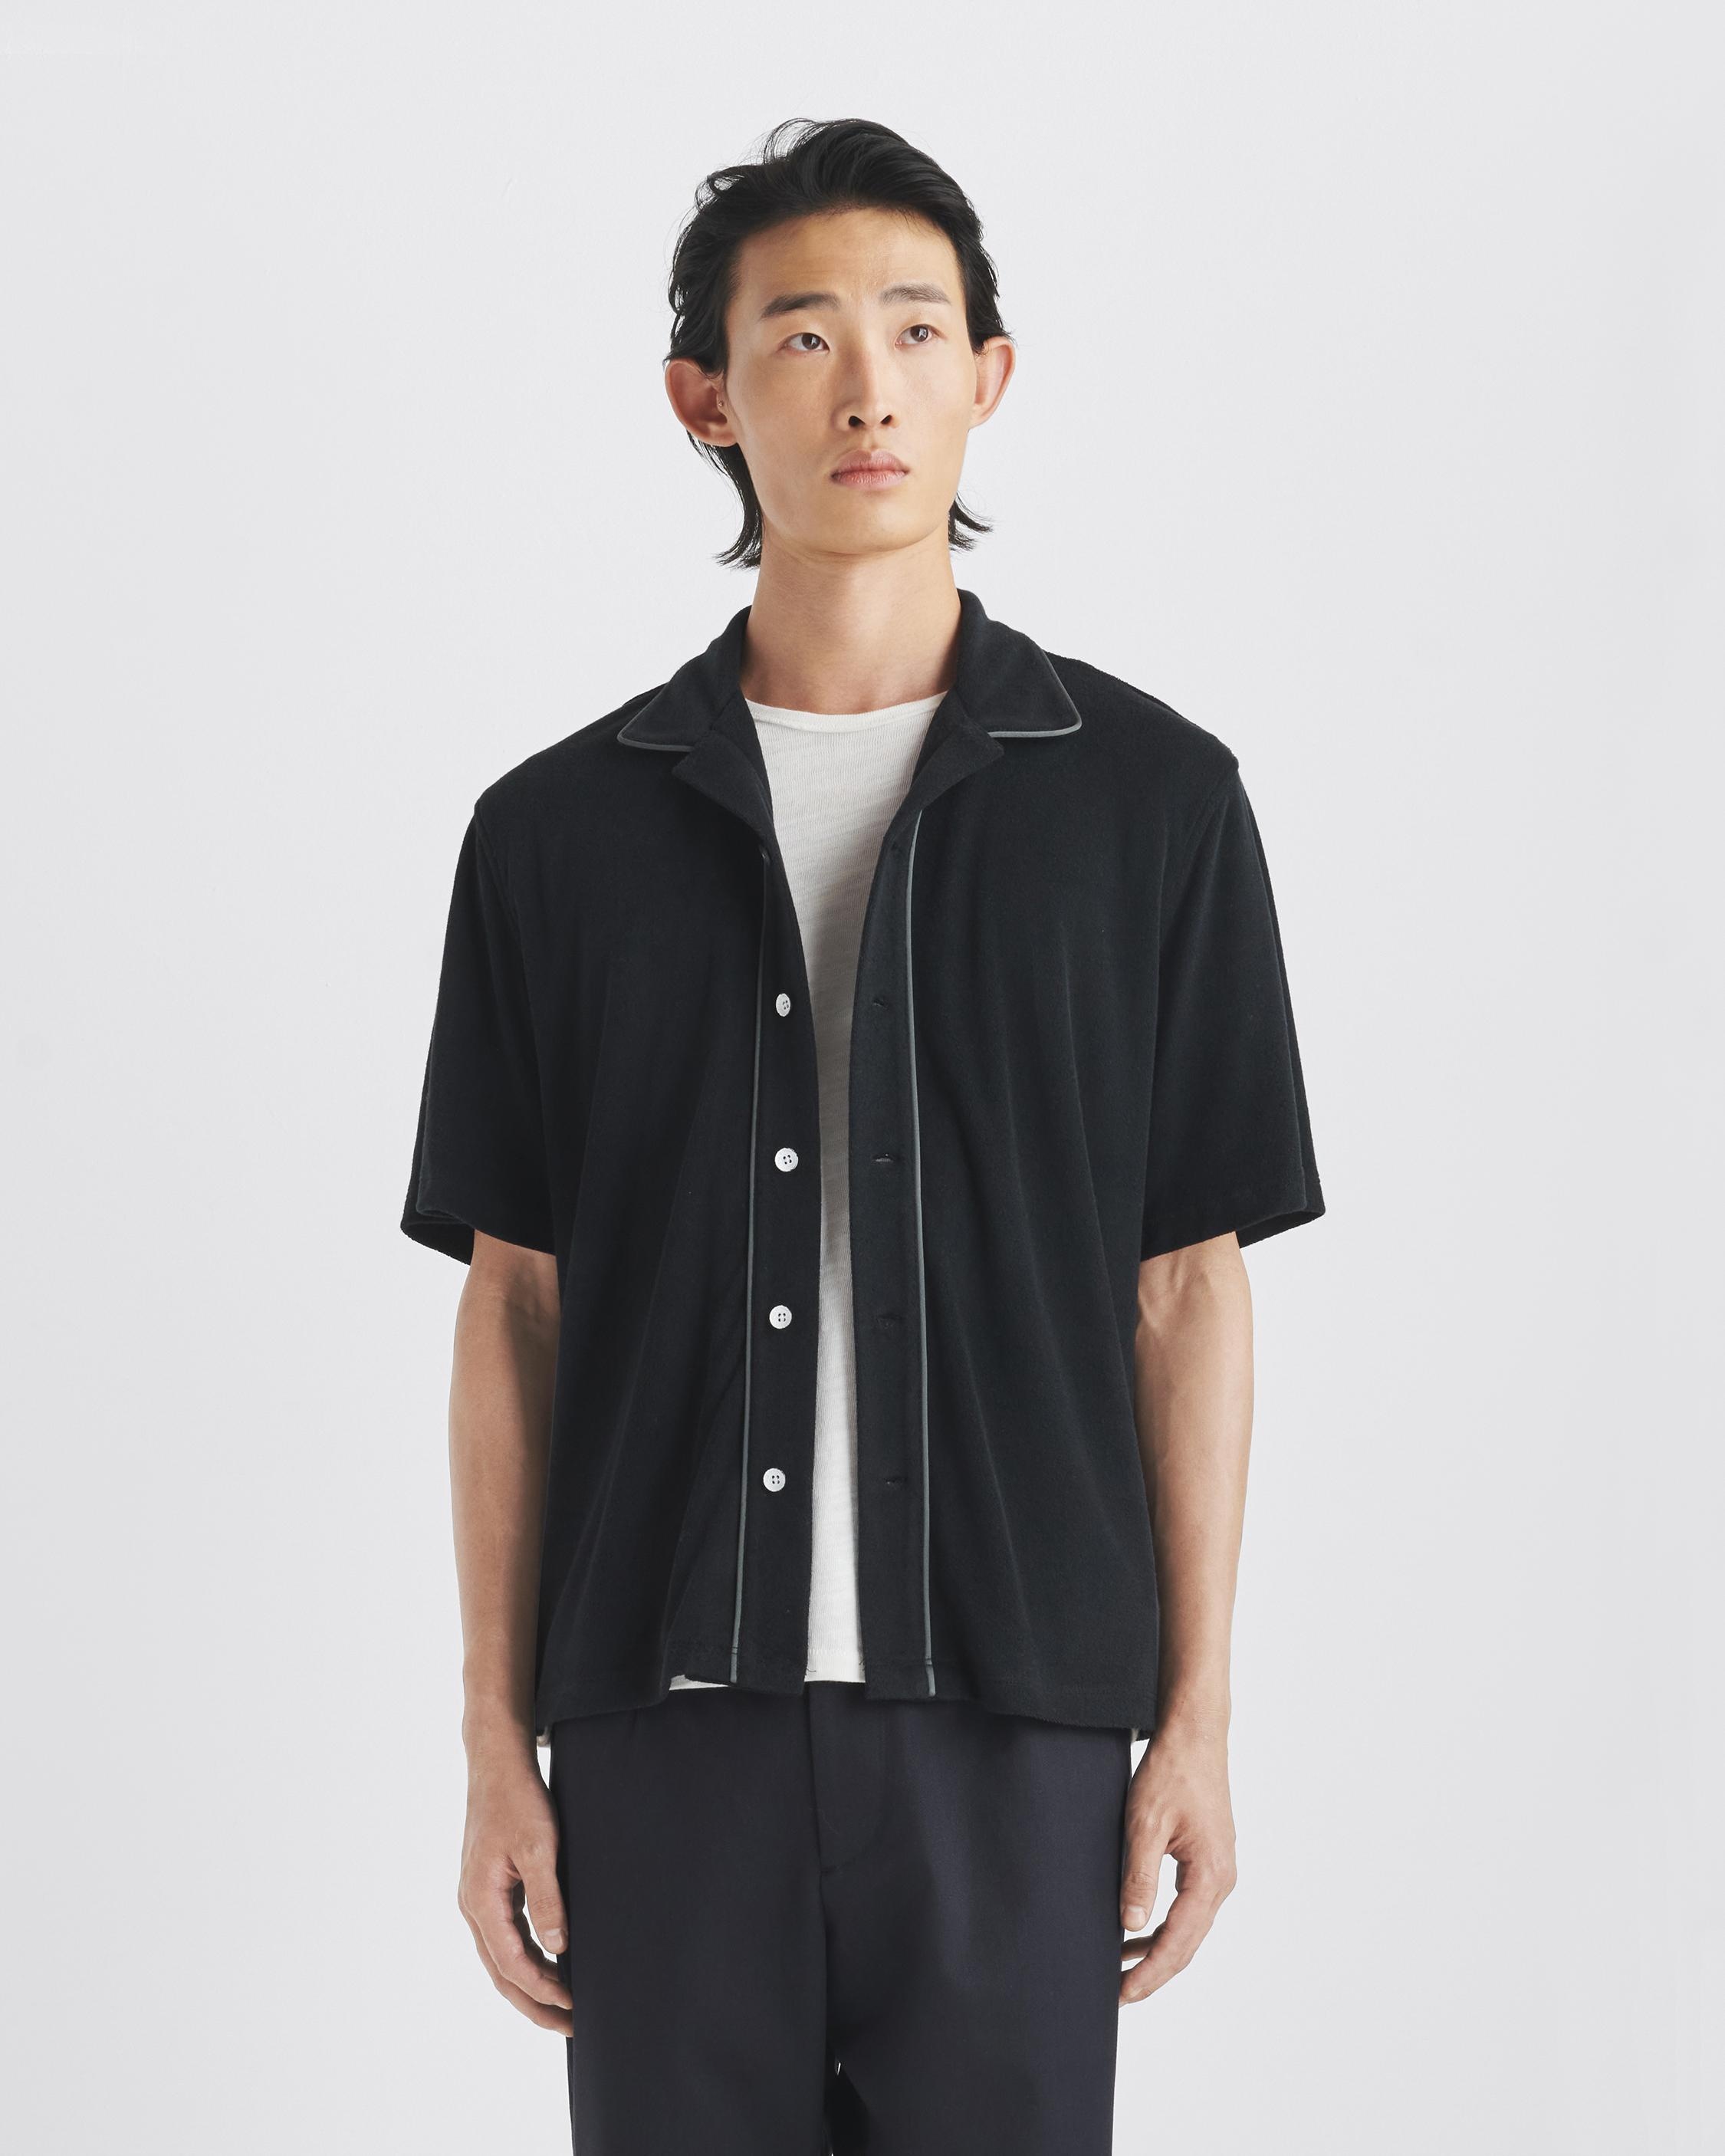 Avery Toweling Shirt
Classic Fit Button Down - 3